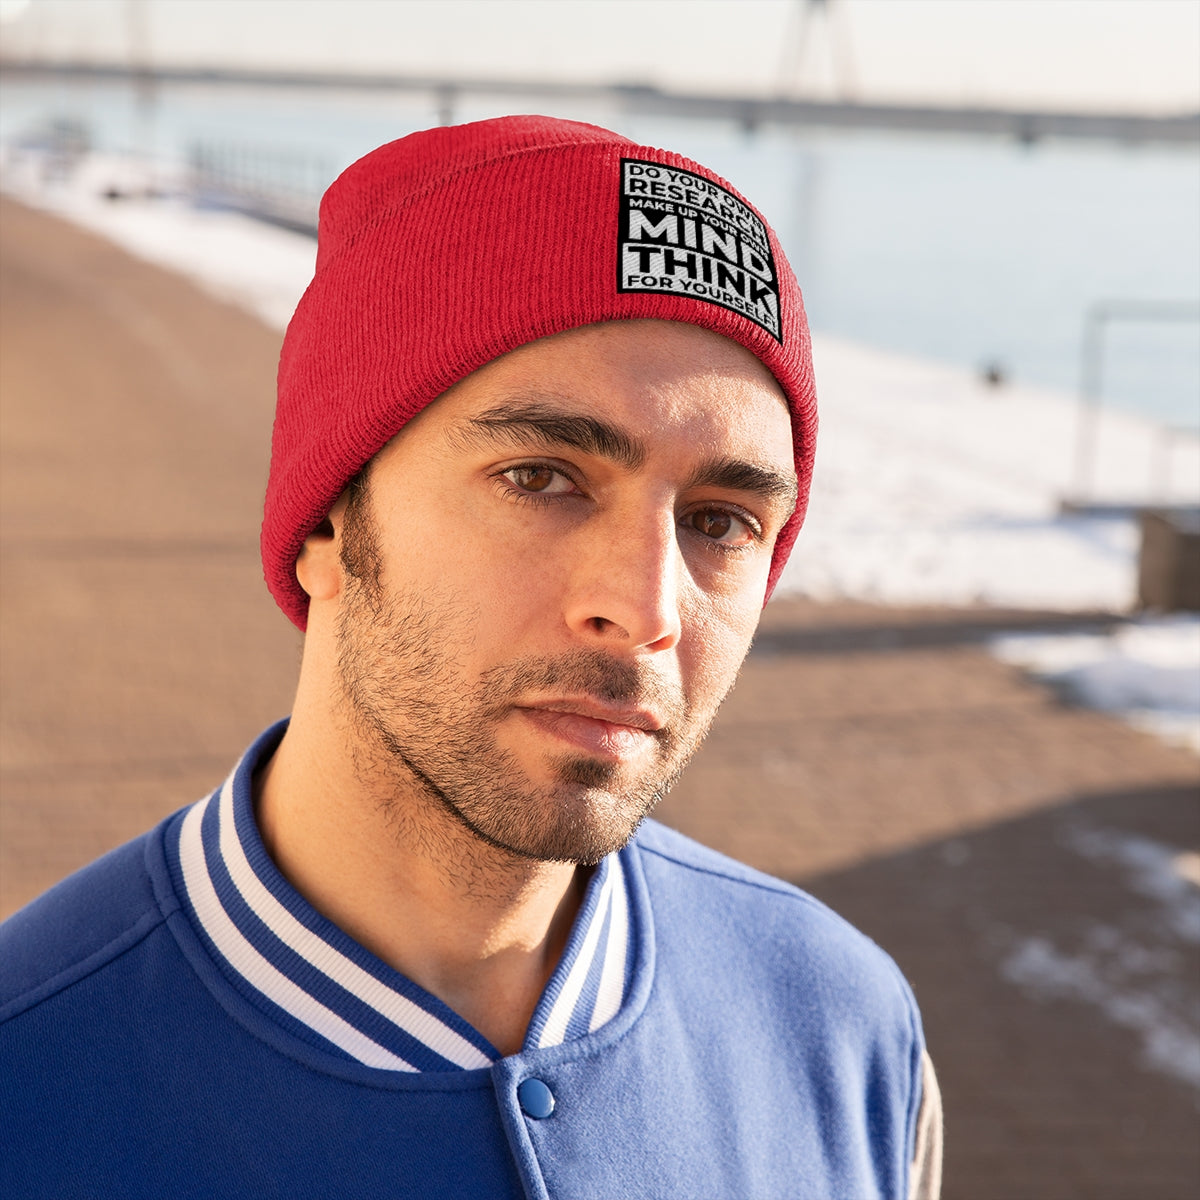 'Think for Yourself' Knit Beanie